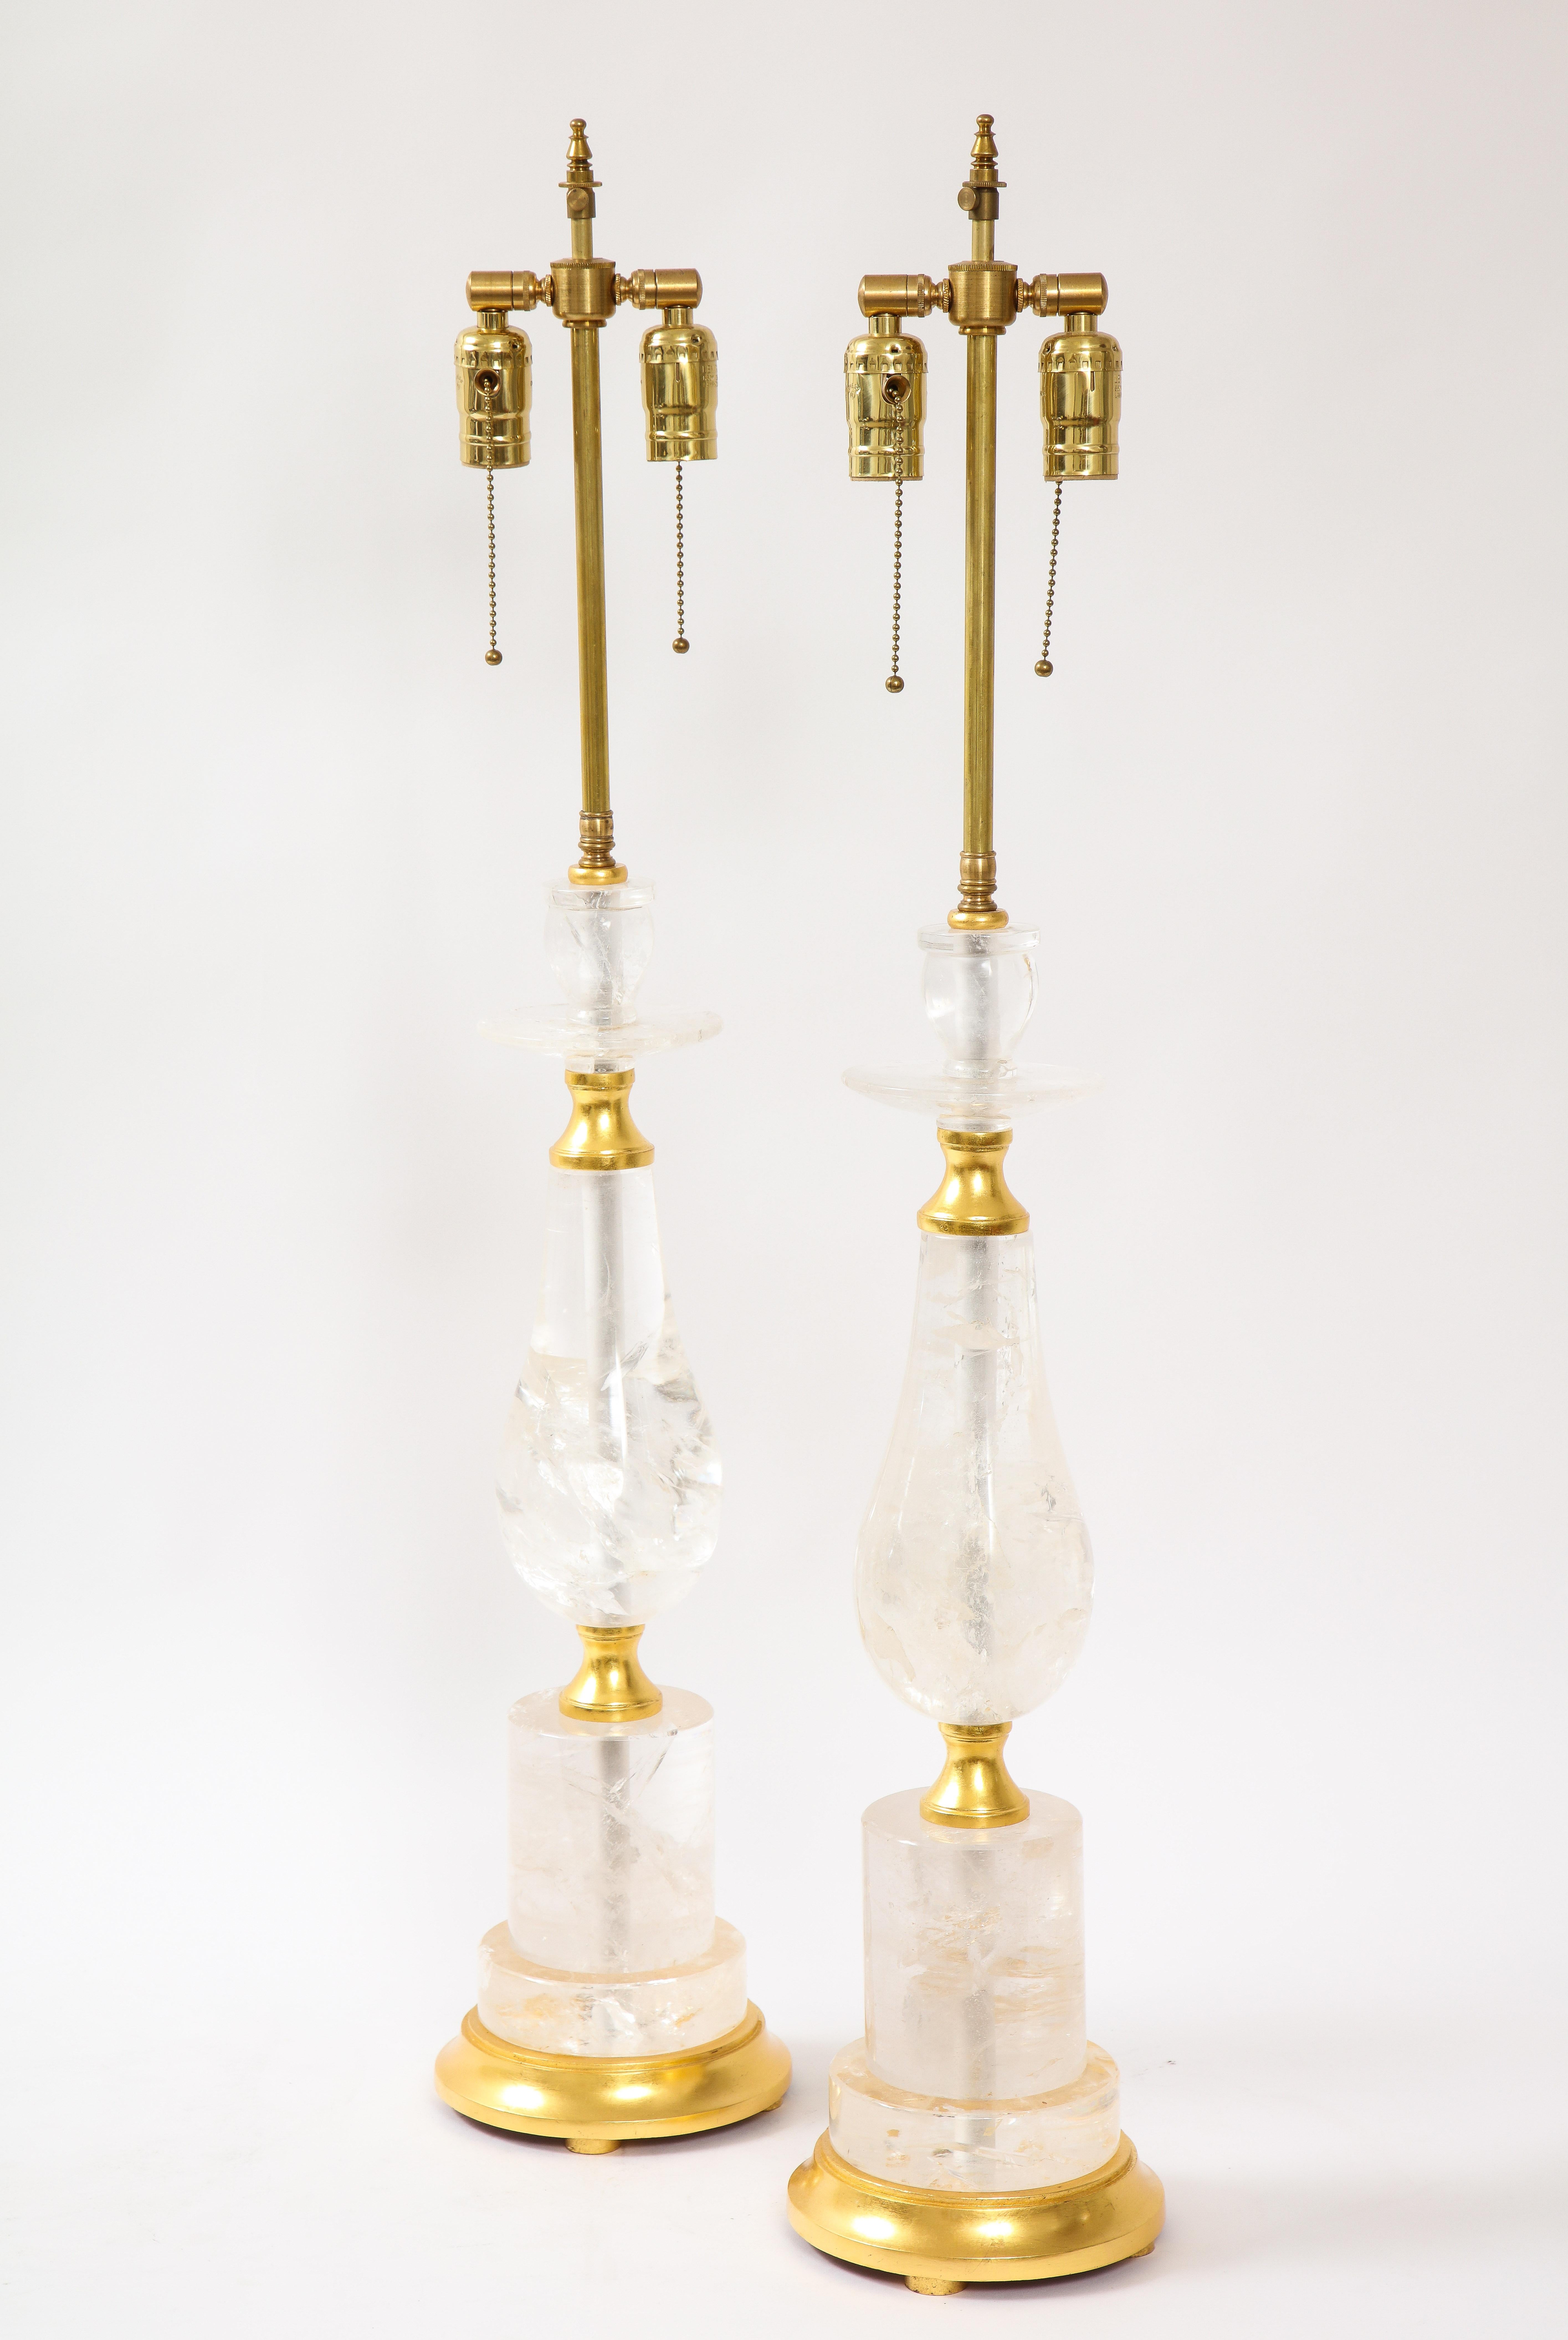 French Pair of Mid-Century Modern Rock Crystal Quartz Mounted Lamps, Att. to 